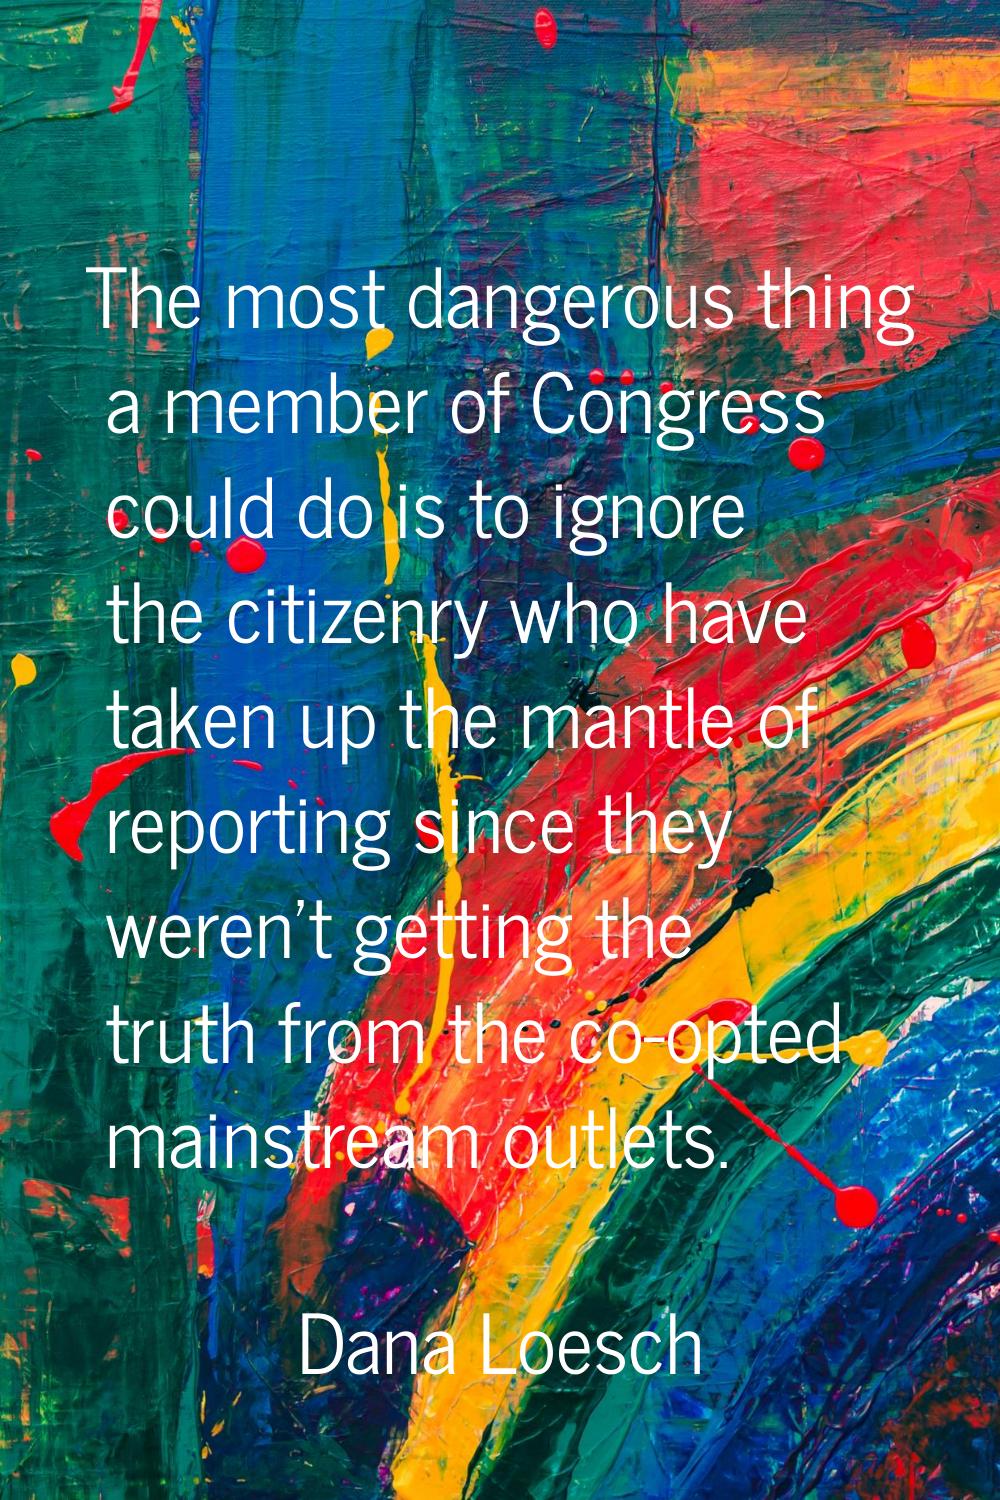 The most dangerous thing a member of Congress could do is to ignore the citizenry who have taken up